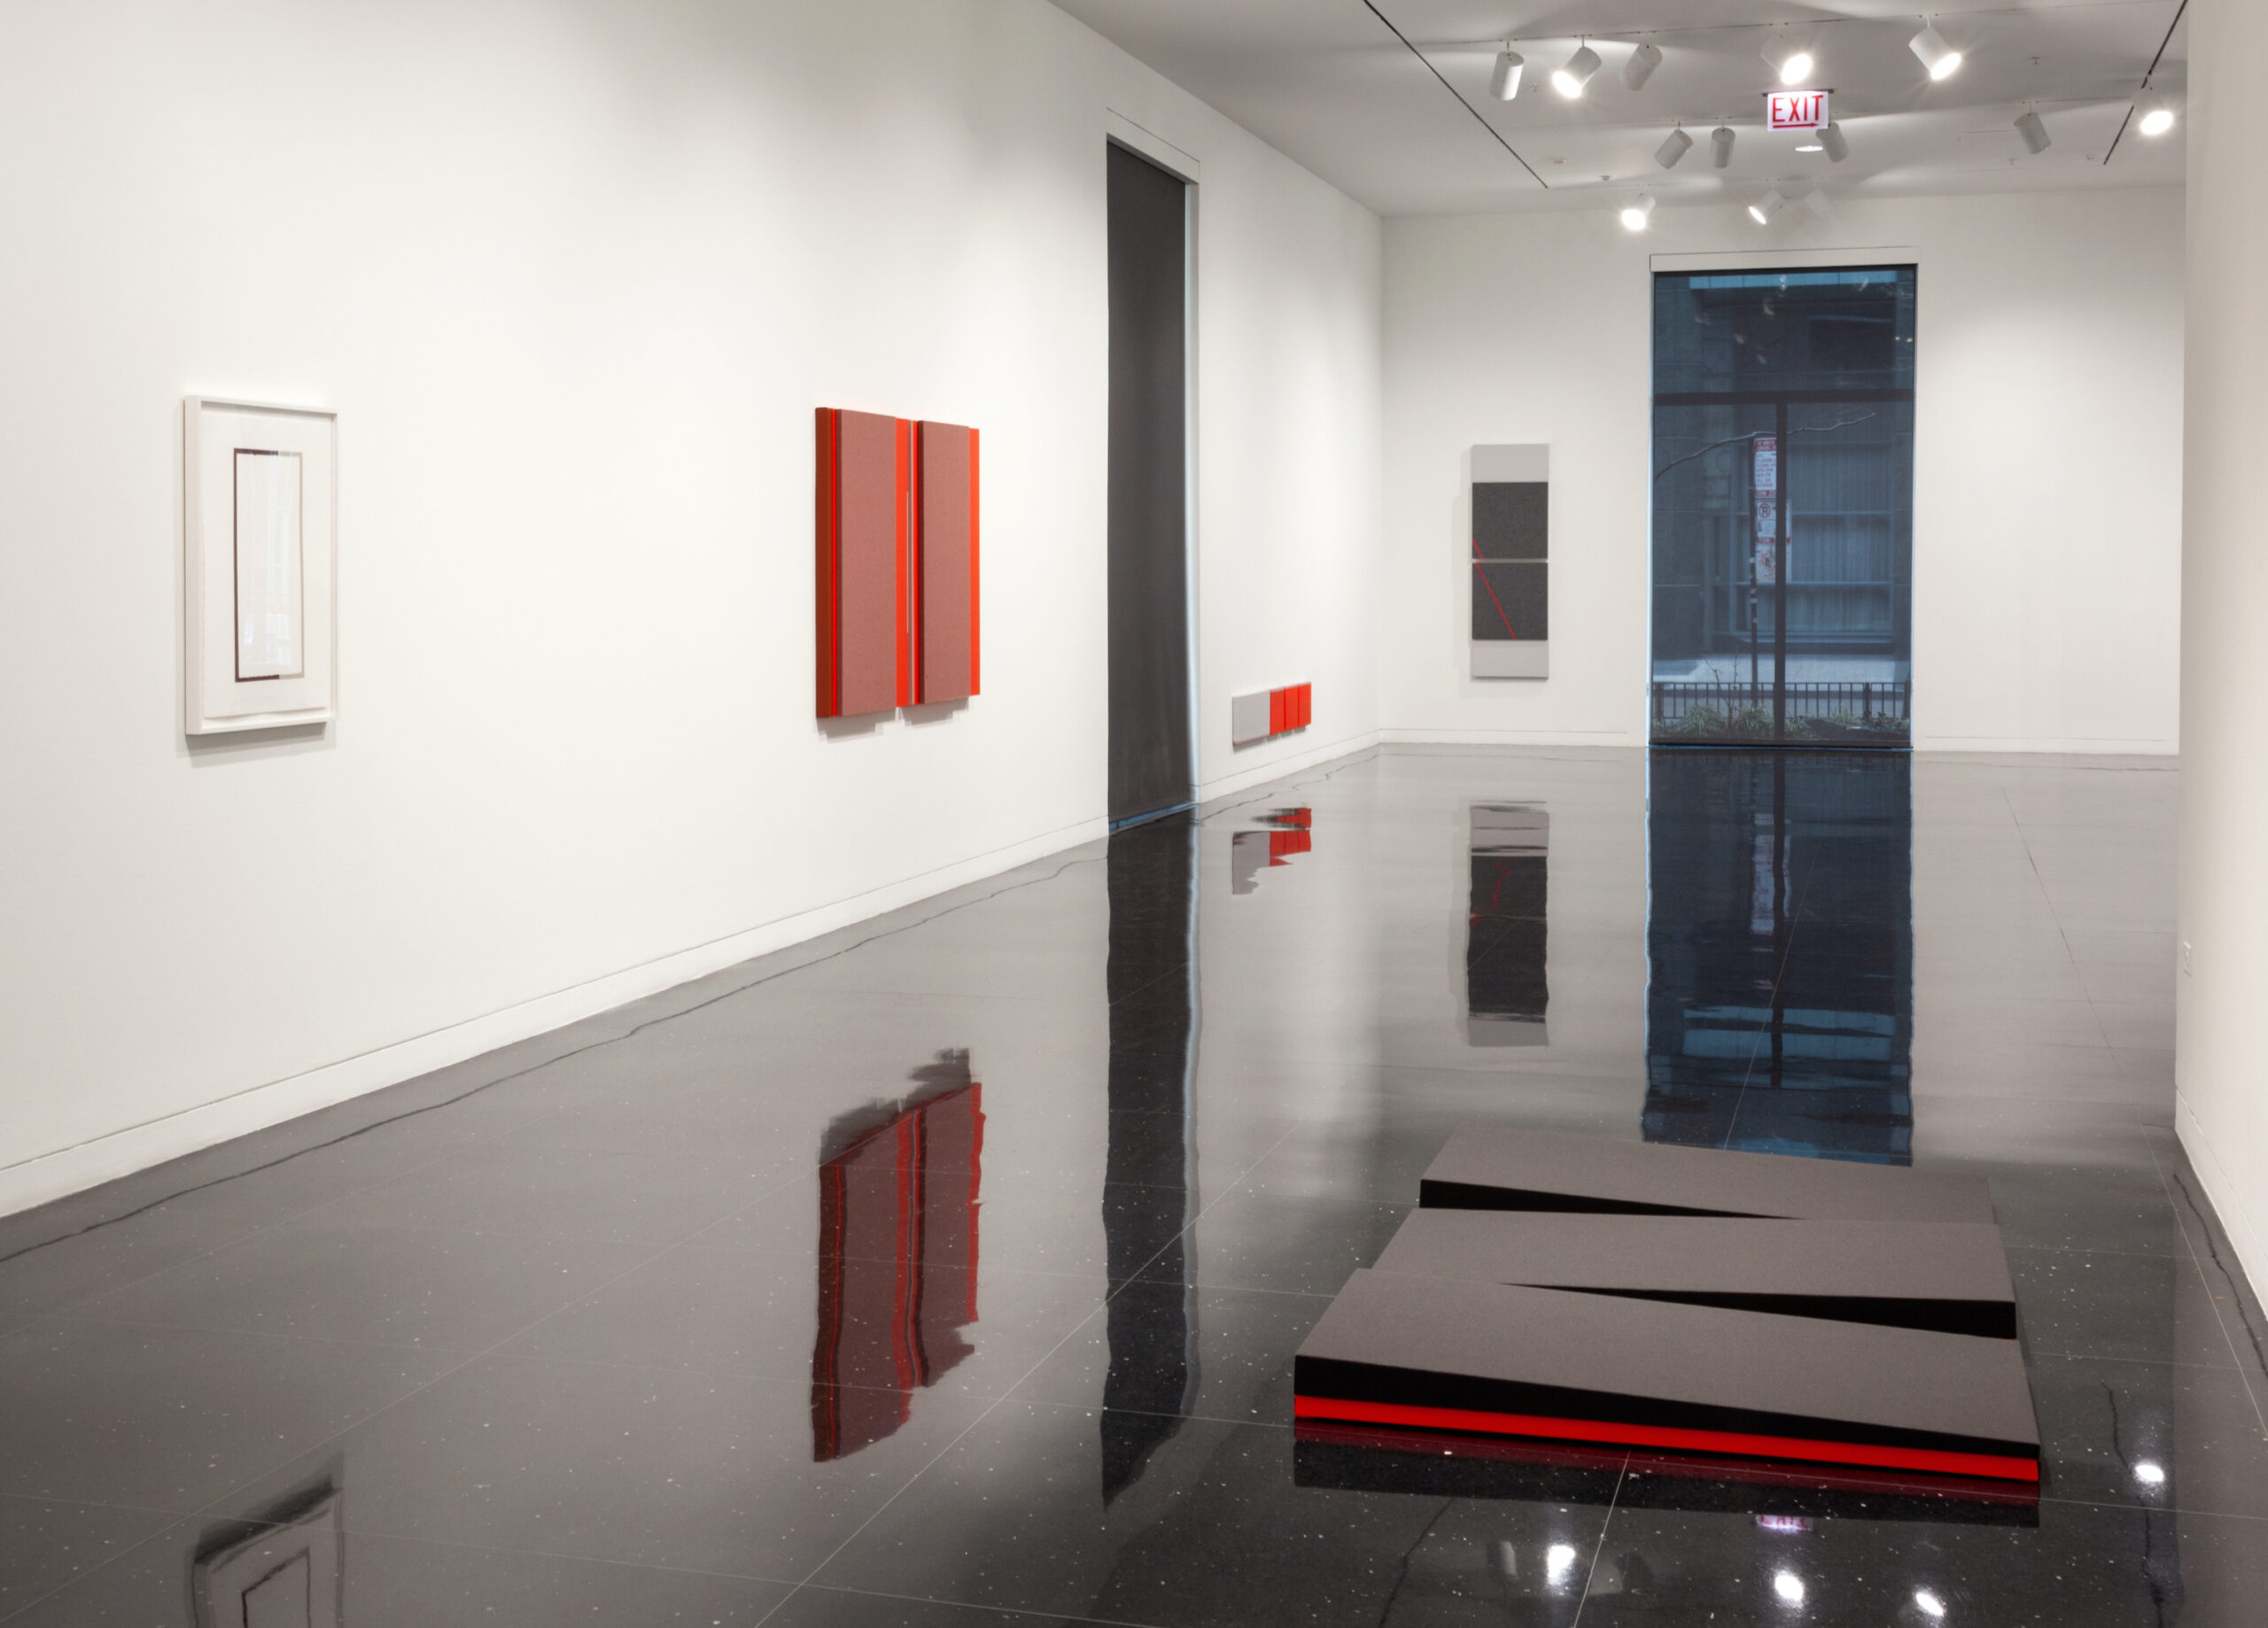 Installation view of a gallery with abstract red and gray artworks on the white walls. On the floor in the foreground is a series of 3 black sculptures with bright red bases that resemble ramps.